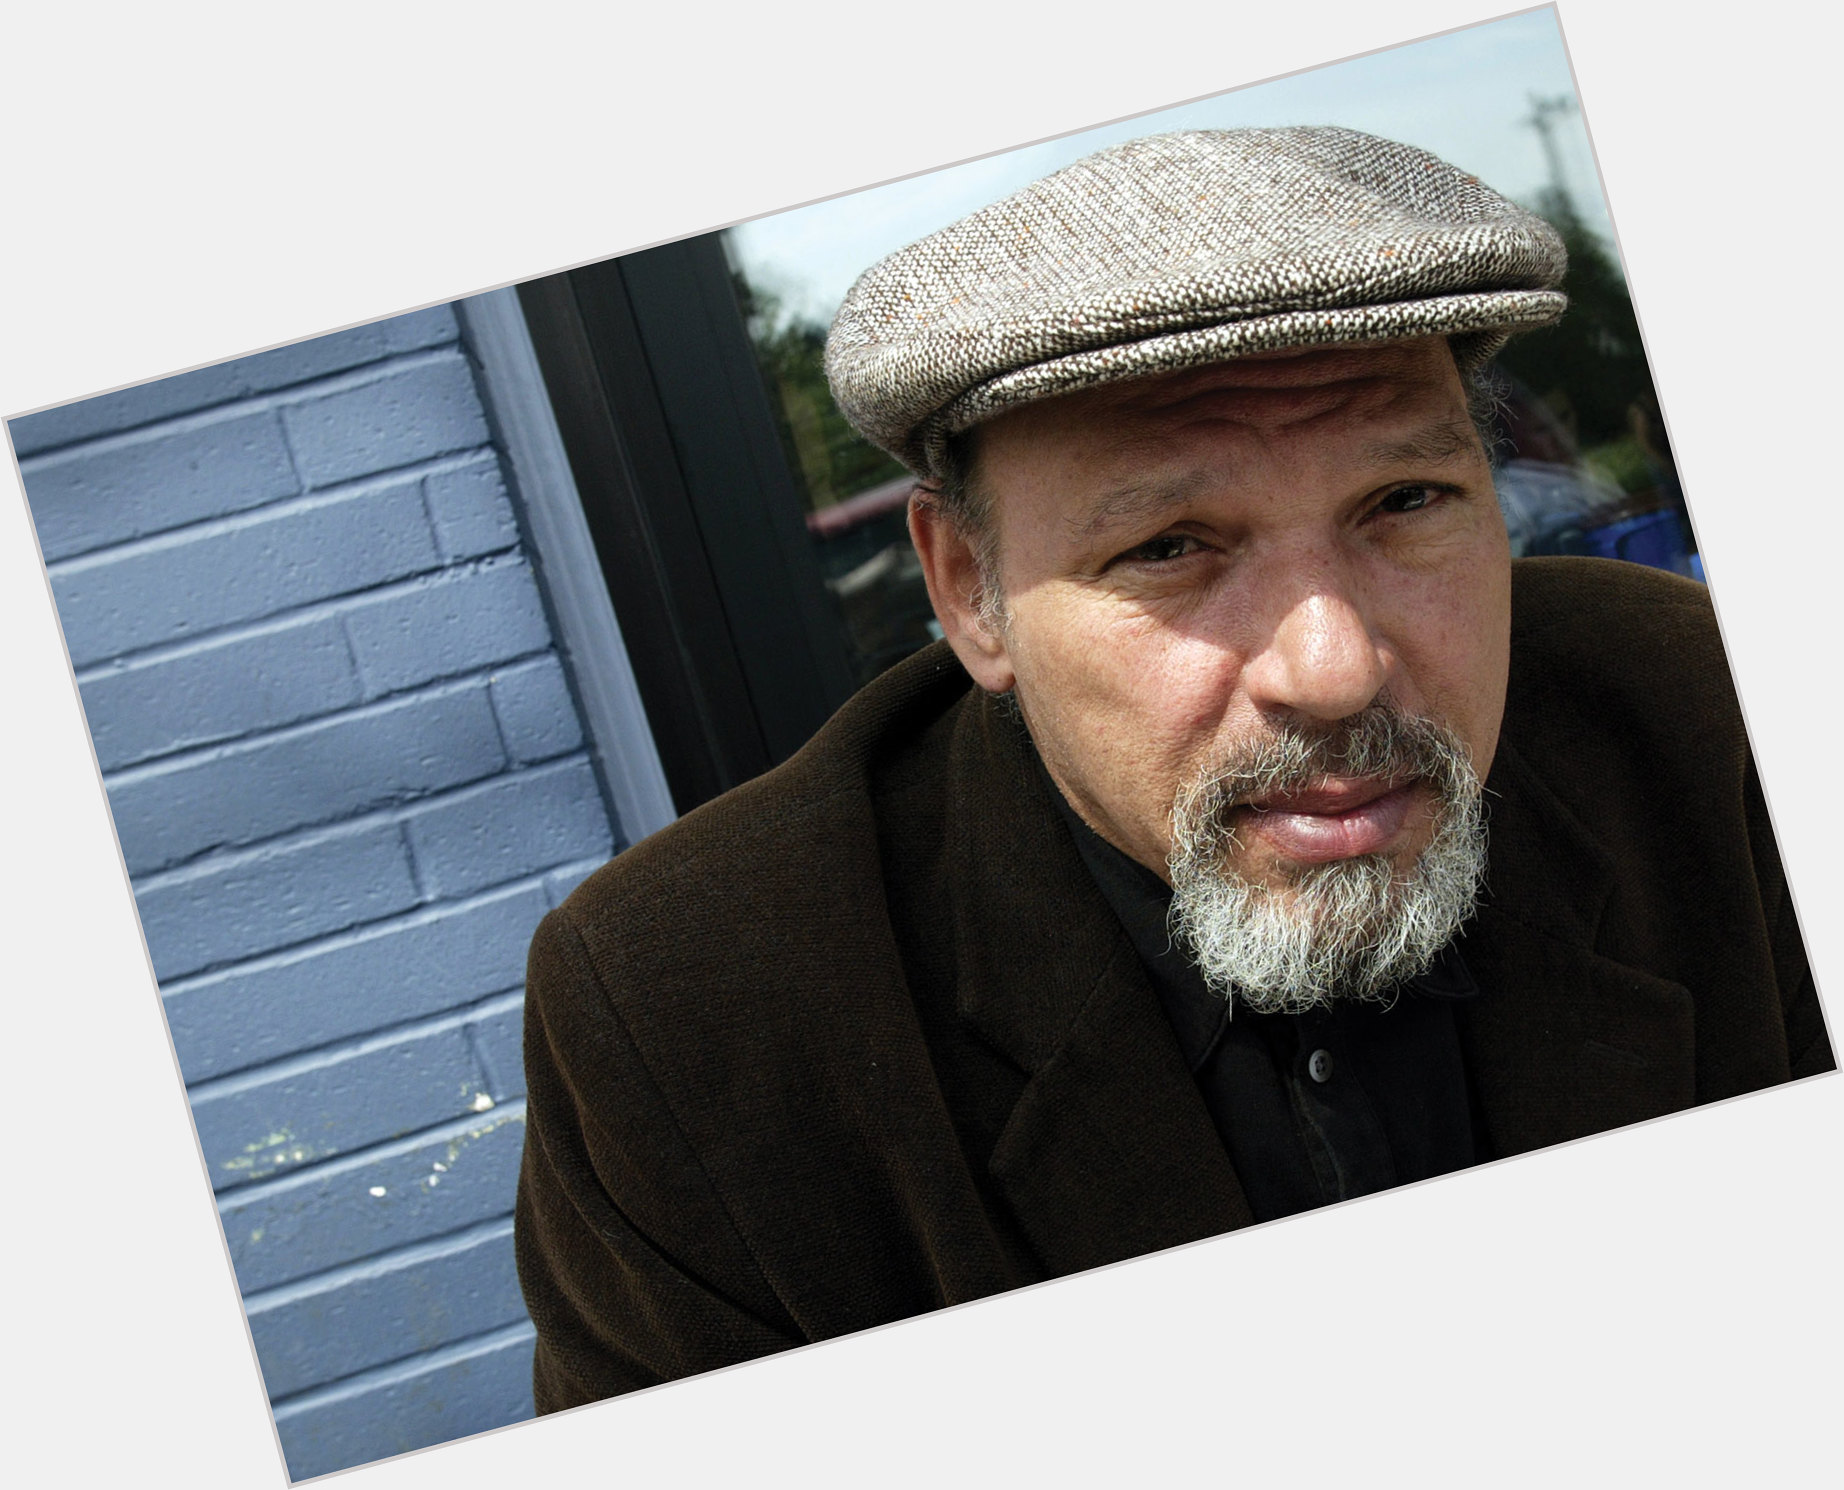 <a href="/hot-men/august-wilson/is-he-black-racist-or-white-why-important">August Wilson</a> Large body,  